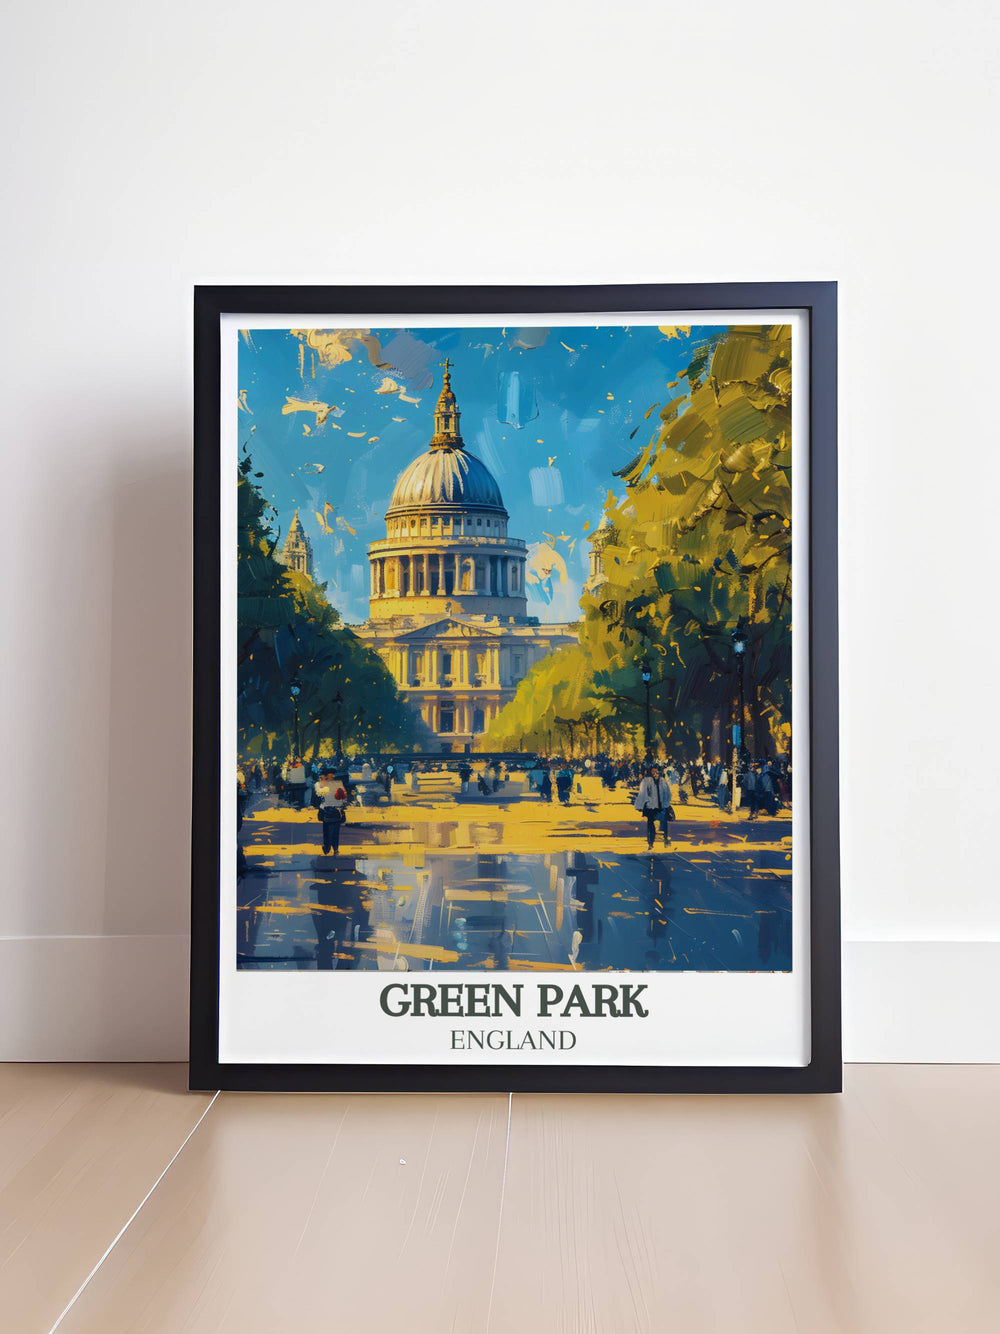 A vibrant London travel poster showcasing Constitution Hill with its historic pathway leading to Victoria Memorial and Buckingham Palace ideal for adding a touch of Londons rich history and charm to any room with framed prints.